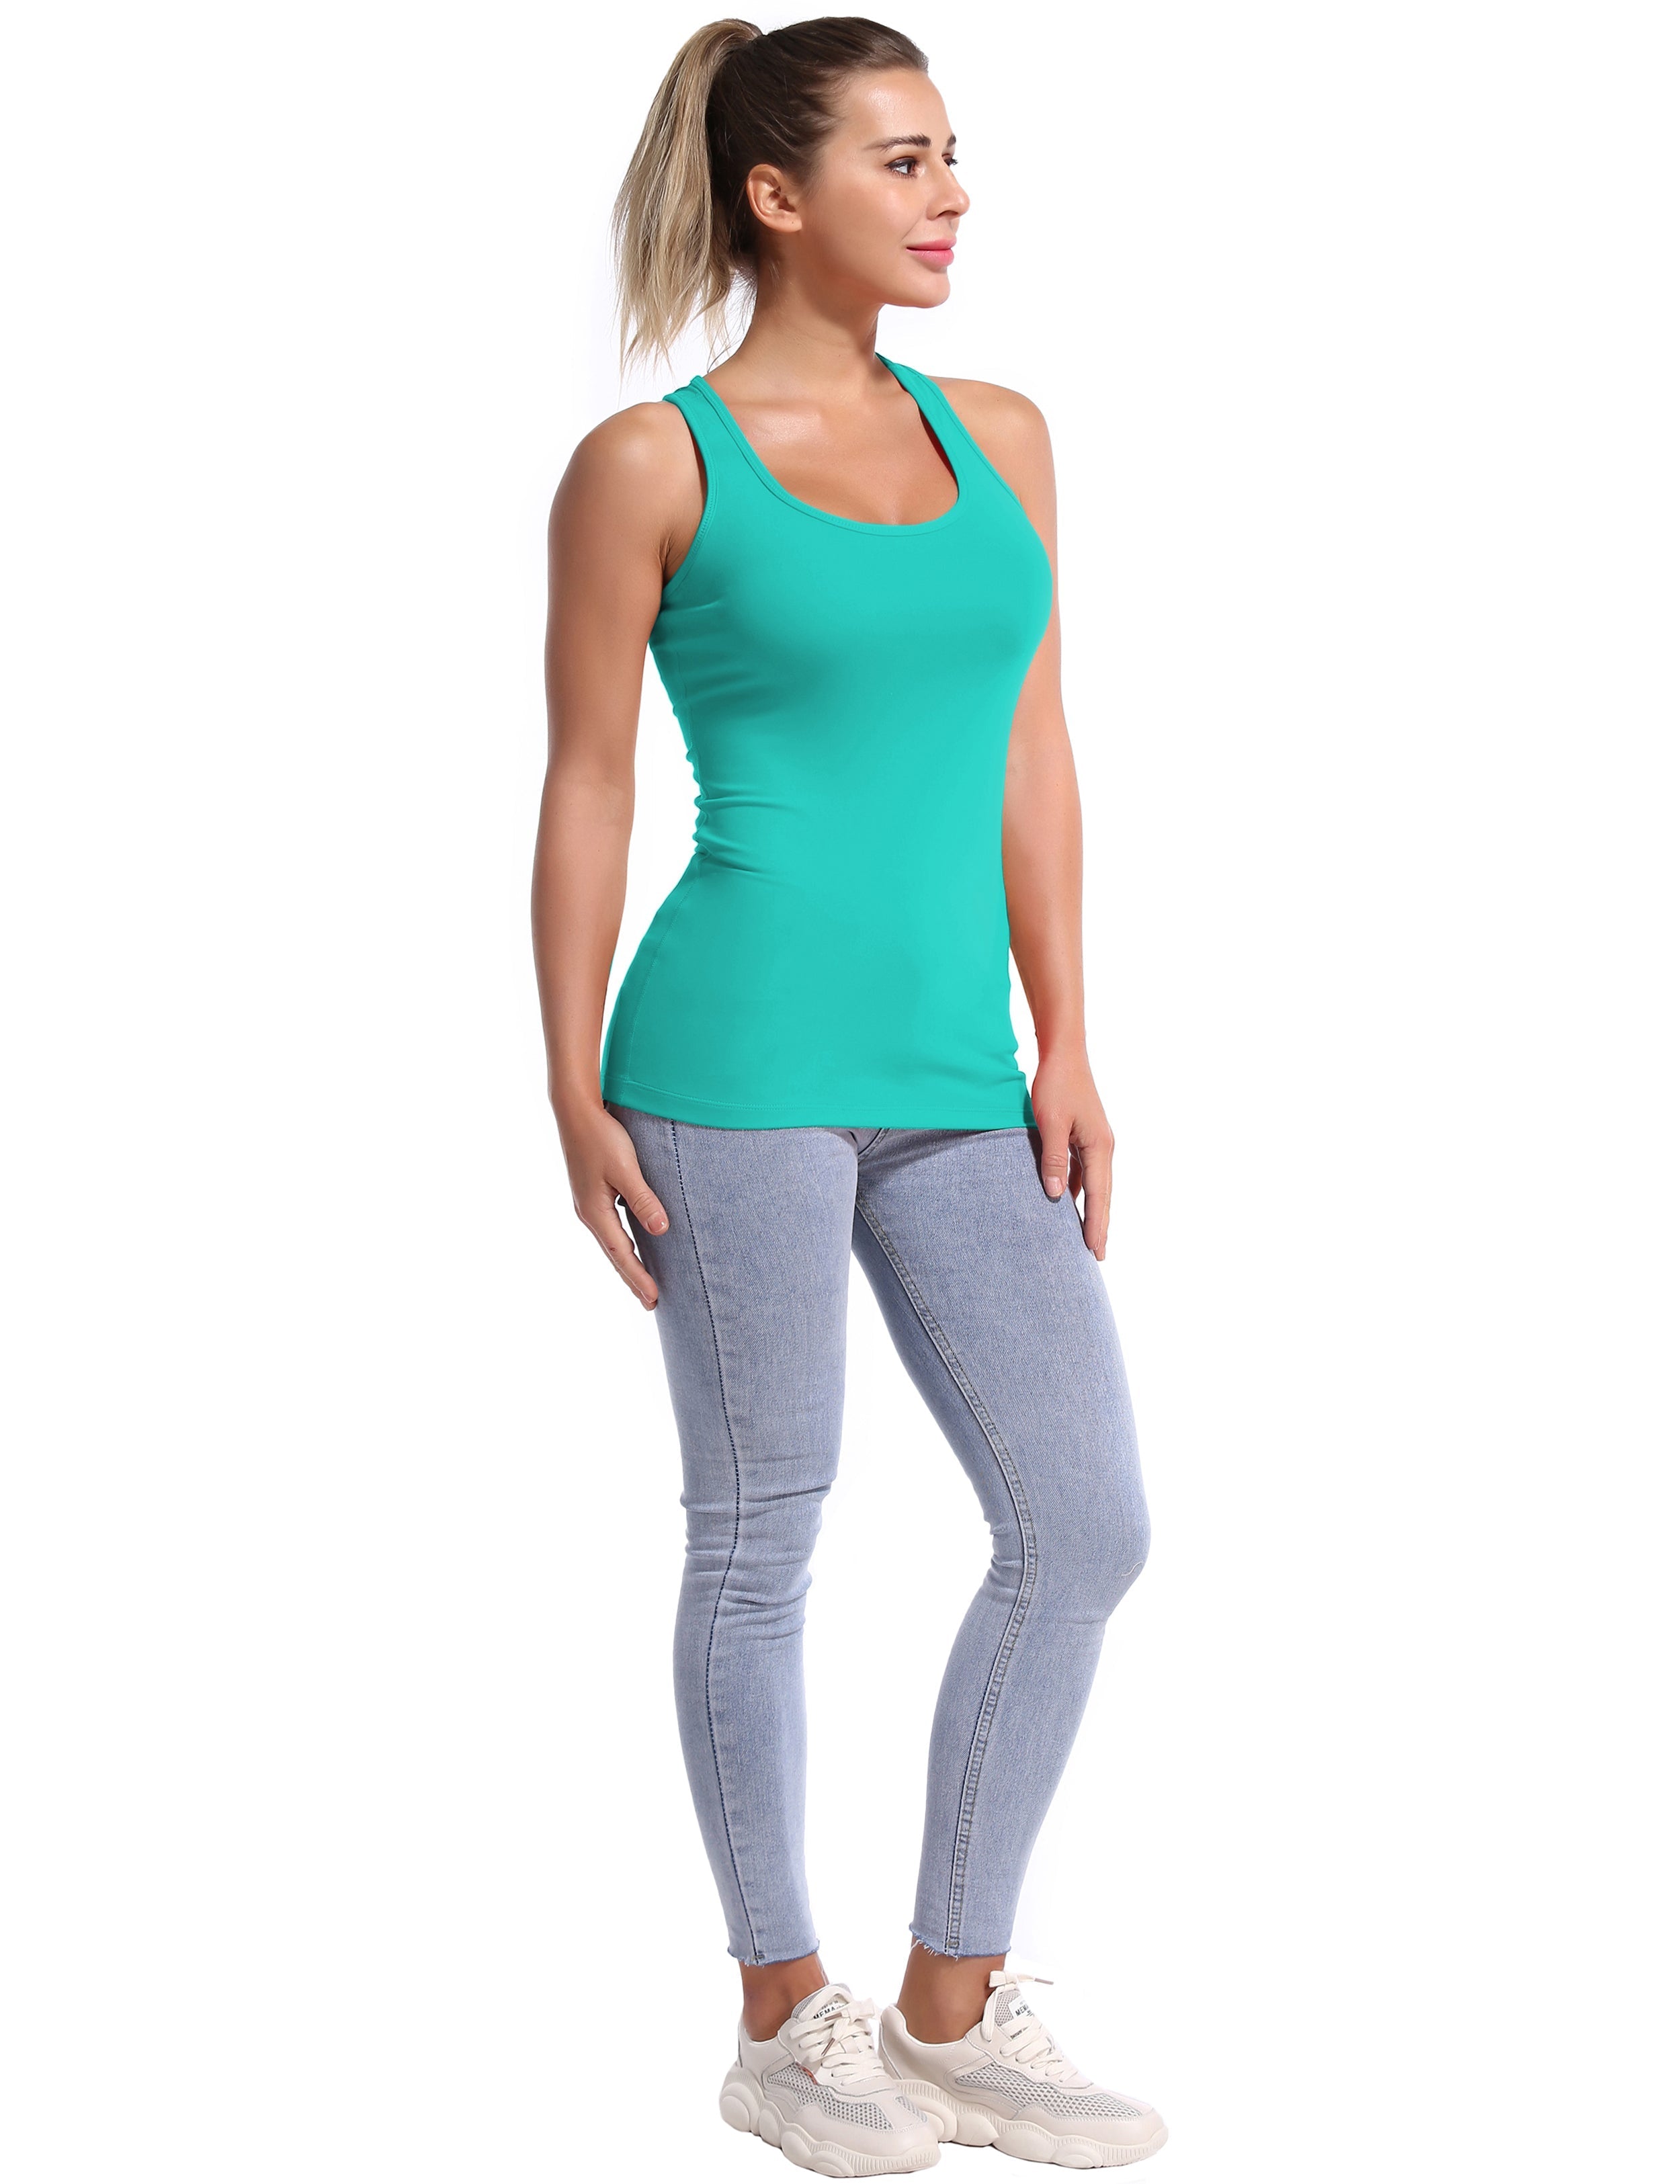 Racerback Athletic Tank Tops cyan 92%Nylon/8%Spandex(Cotton Soft) Designed for Tall Size Tight Fit So buttery soft, it feels weightless Sweat-wicking Four-way stretch Breathable Contours your body Sits below the waistband for moderate, everyday coverage